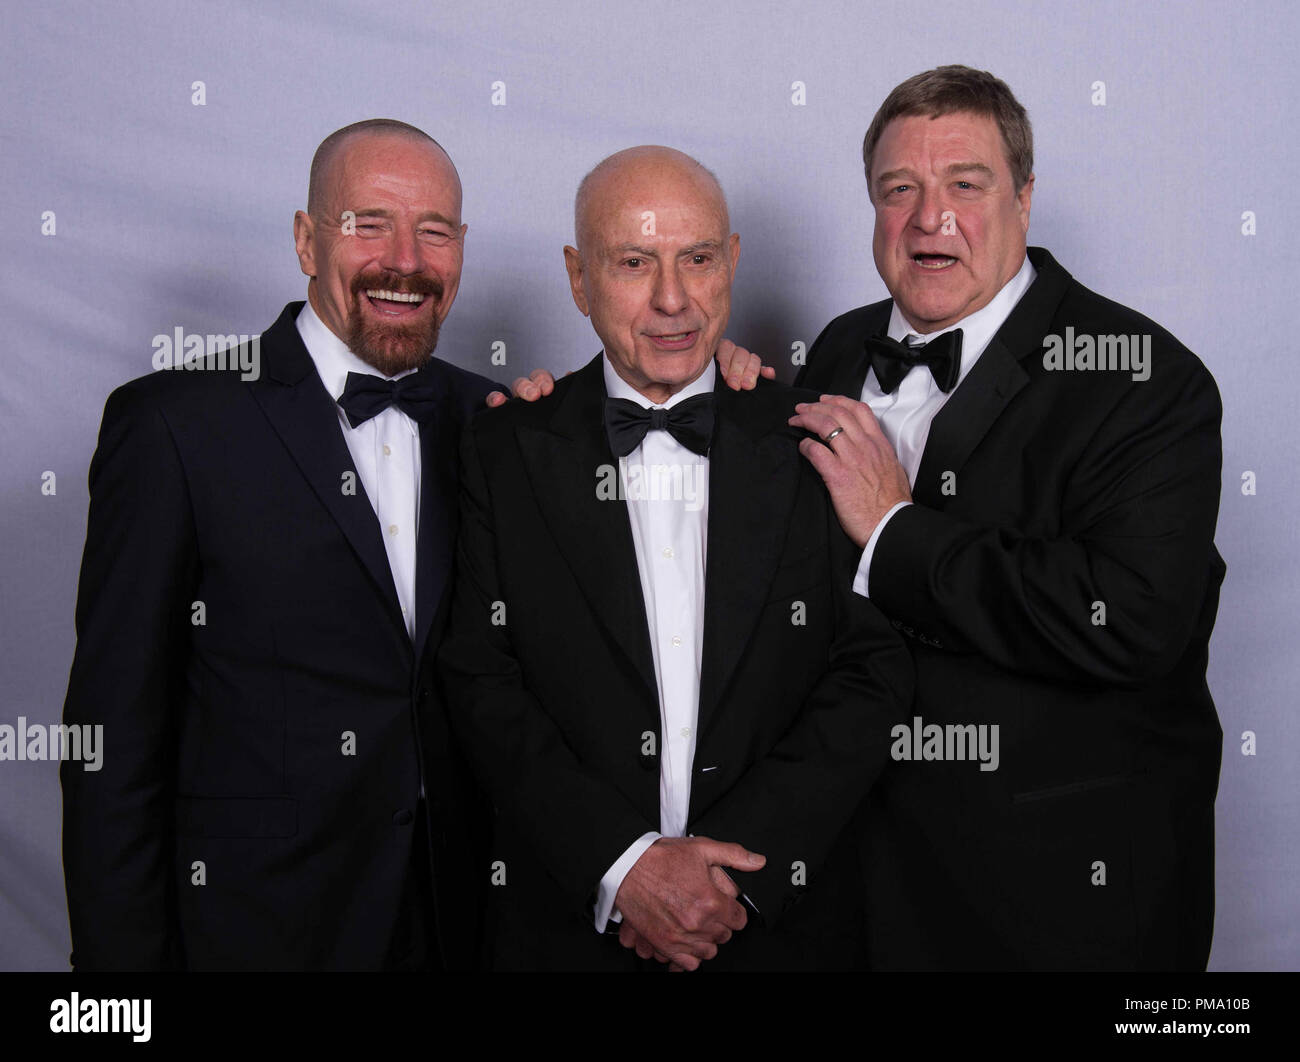 For BEST MOTION PICTURE – DRAMA, the Golden Globe is awarded to “ARGO”, produced by Warner Bros. Pictures, GK Films, Smokehouse Pictures; Warner Bros. Pictures. actors Bryan Cranston, Alan Arkin and John Goodman pose with the award backstage in the press room at the 70th Annual Golden Globe Awards at the Beverly Hilton in Beverly Hills, CA on Sunday, January 13, 2013. Stock Photo